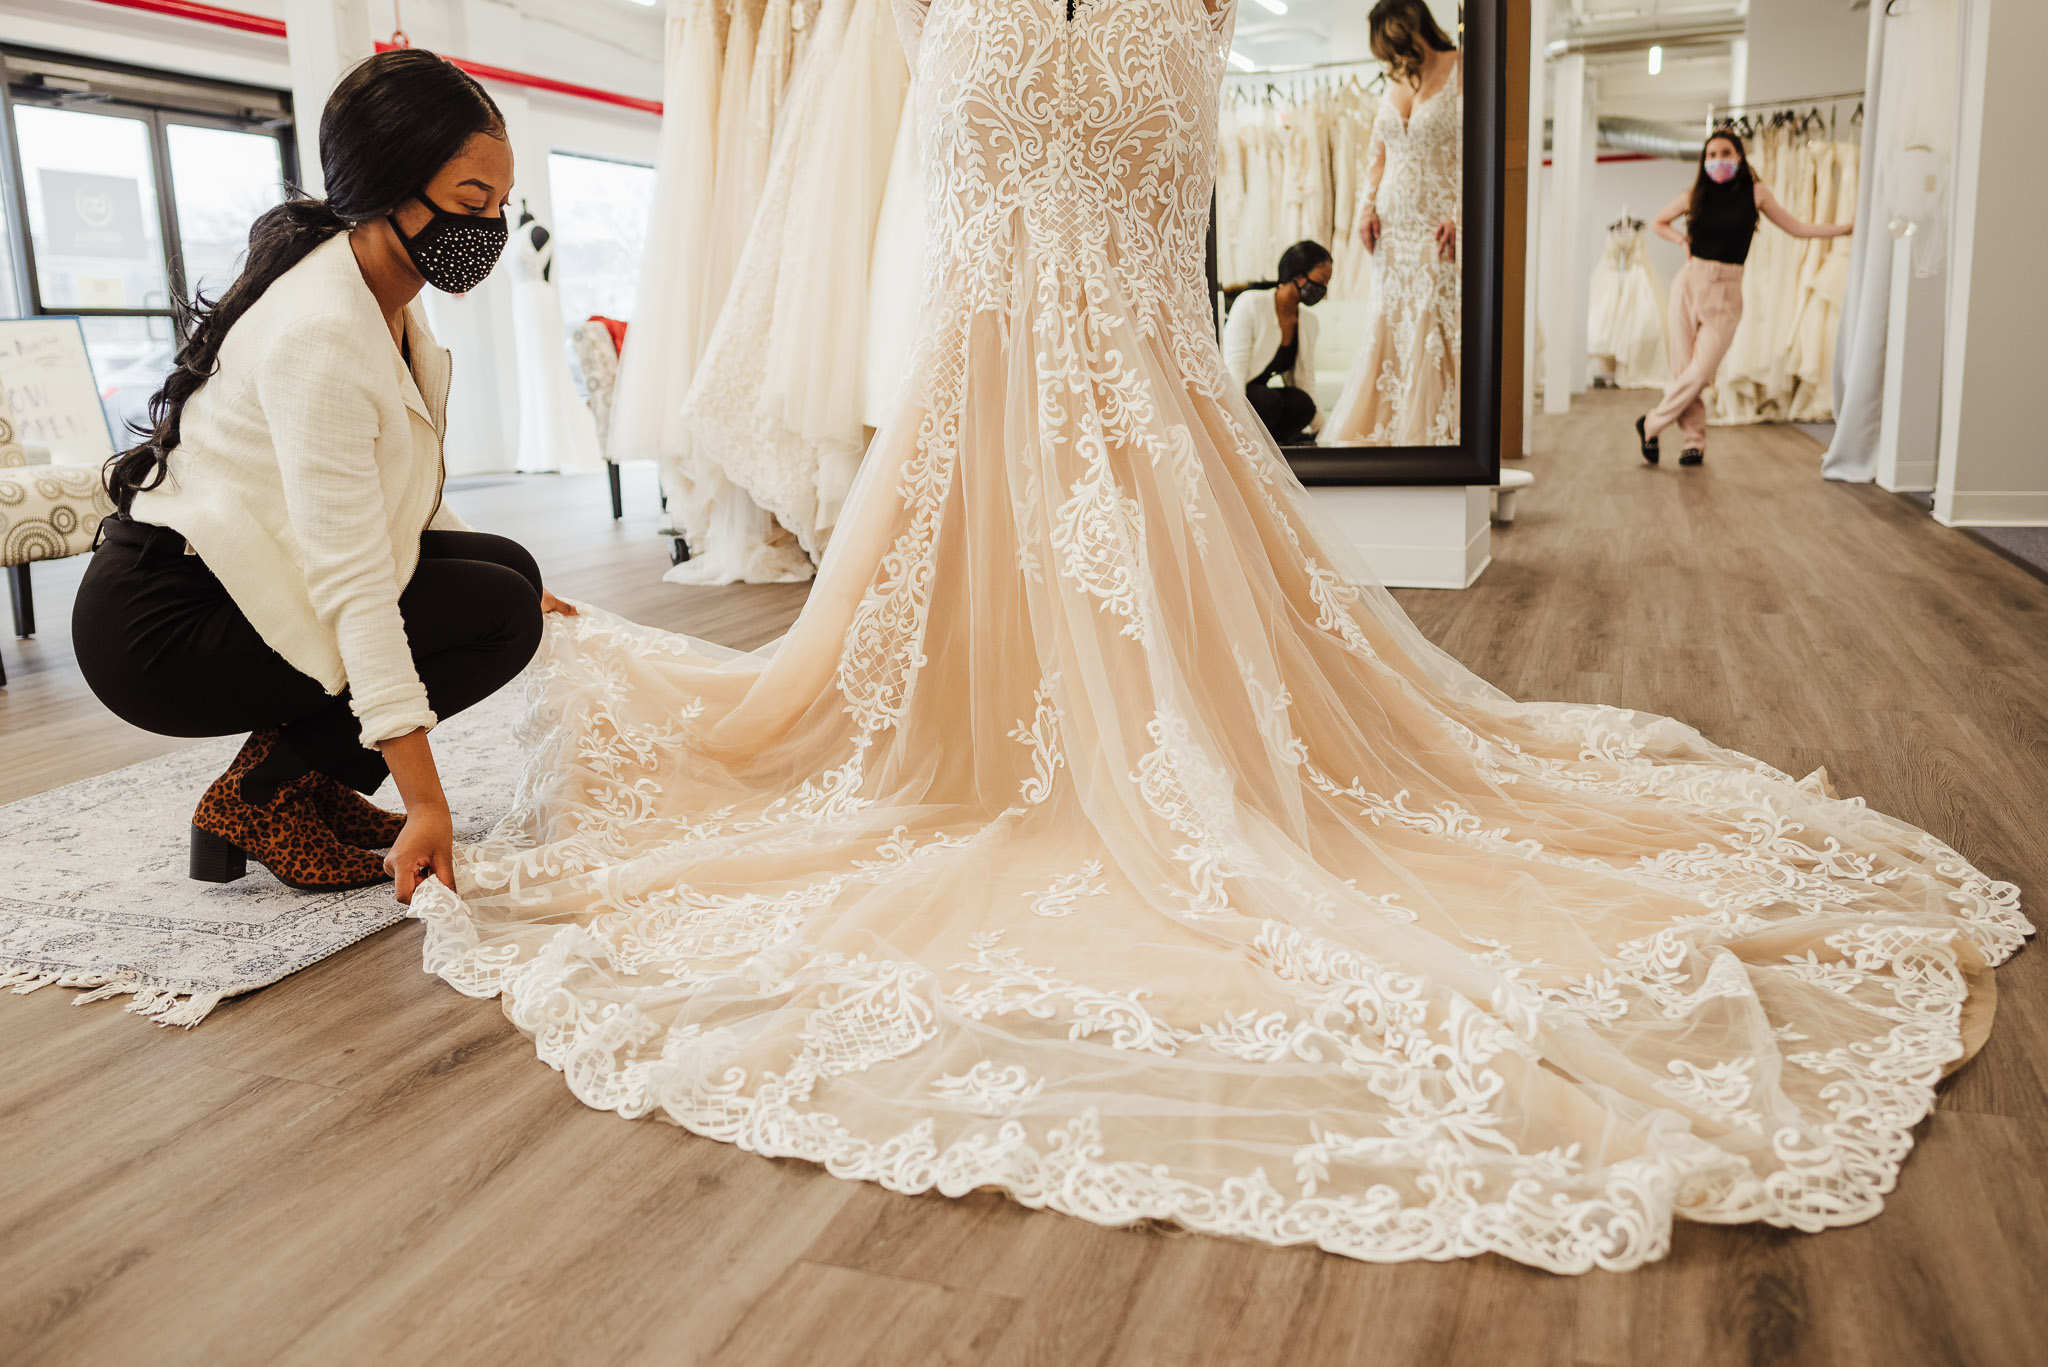 The 10 best wedding dresses from The Bachelor: the hit reality TV show's  brides chose stunning couture by Badgley Mischka, Monique Lhuillier, Maggie  Sottero and more … | South China Morning Post